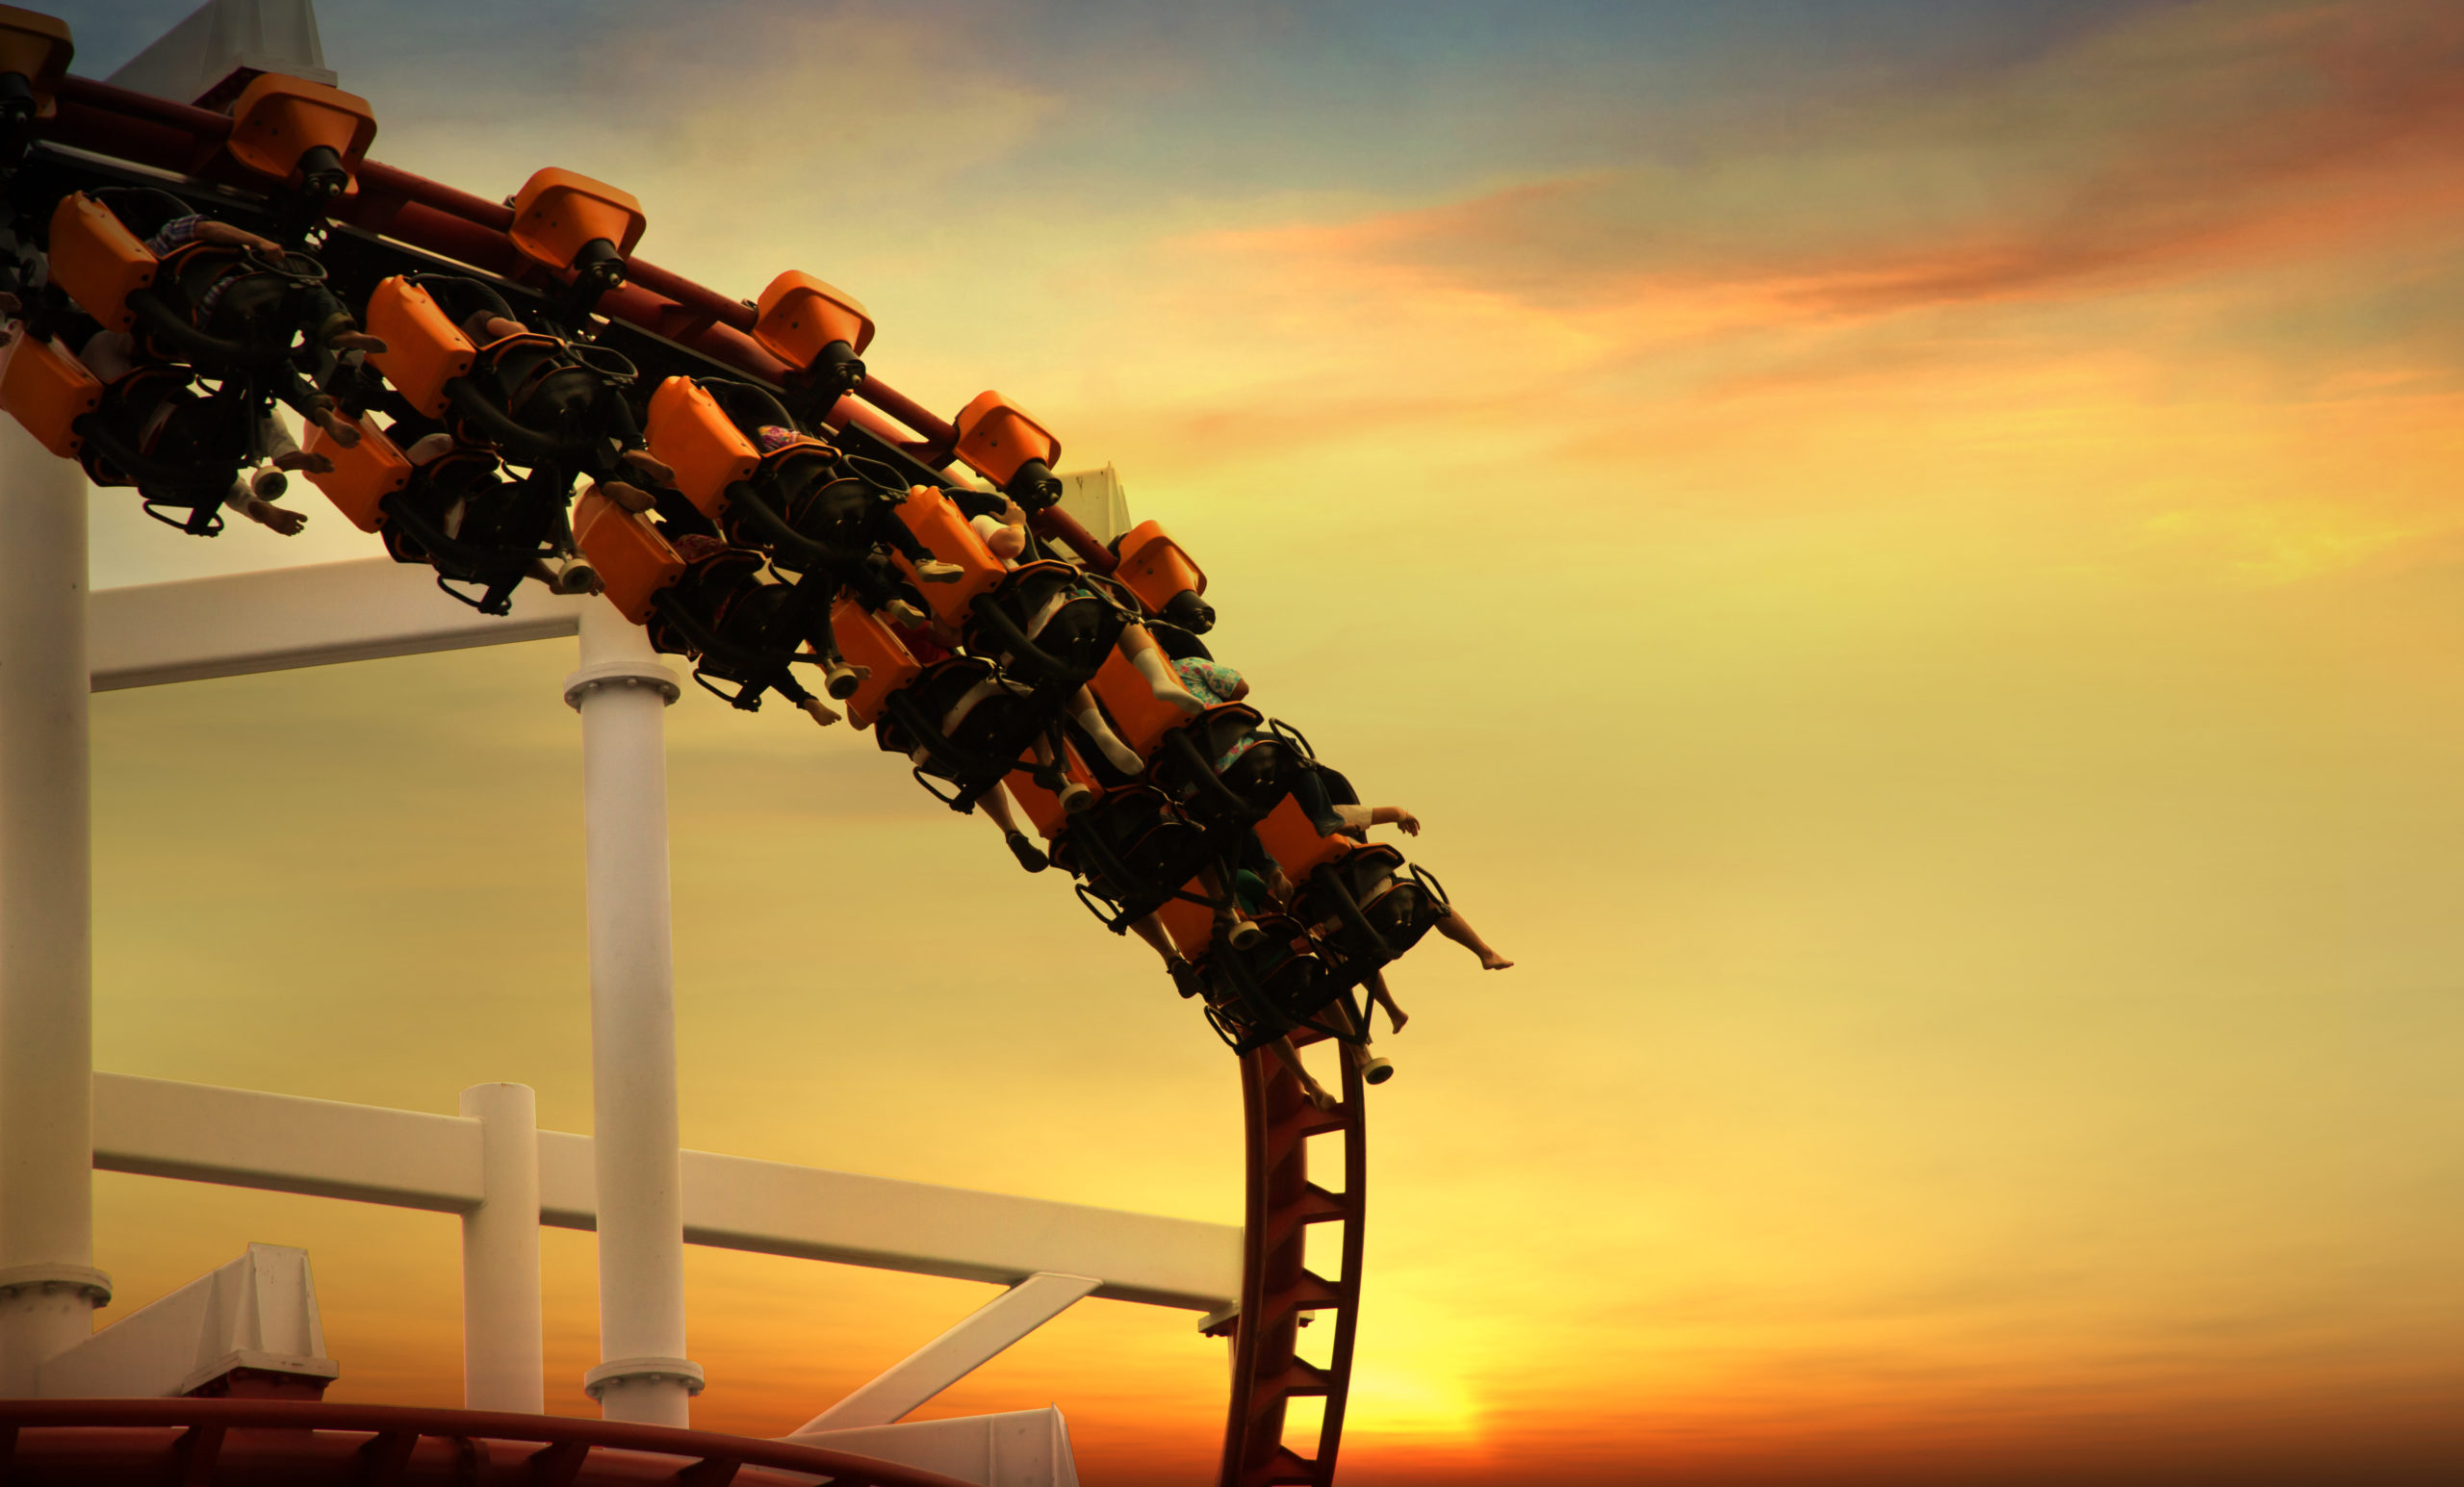 Riding the Roller-Coaster of Divorce